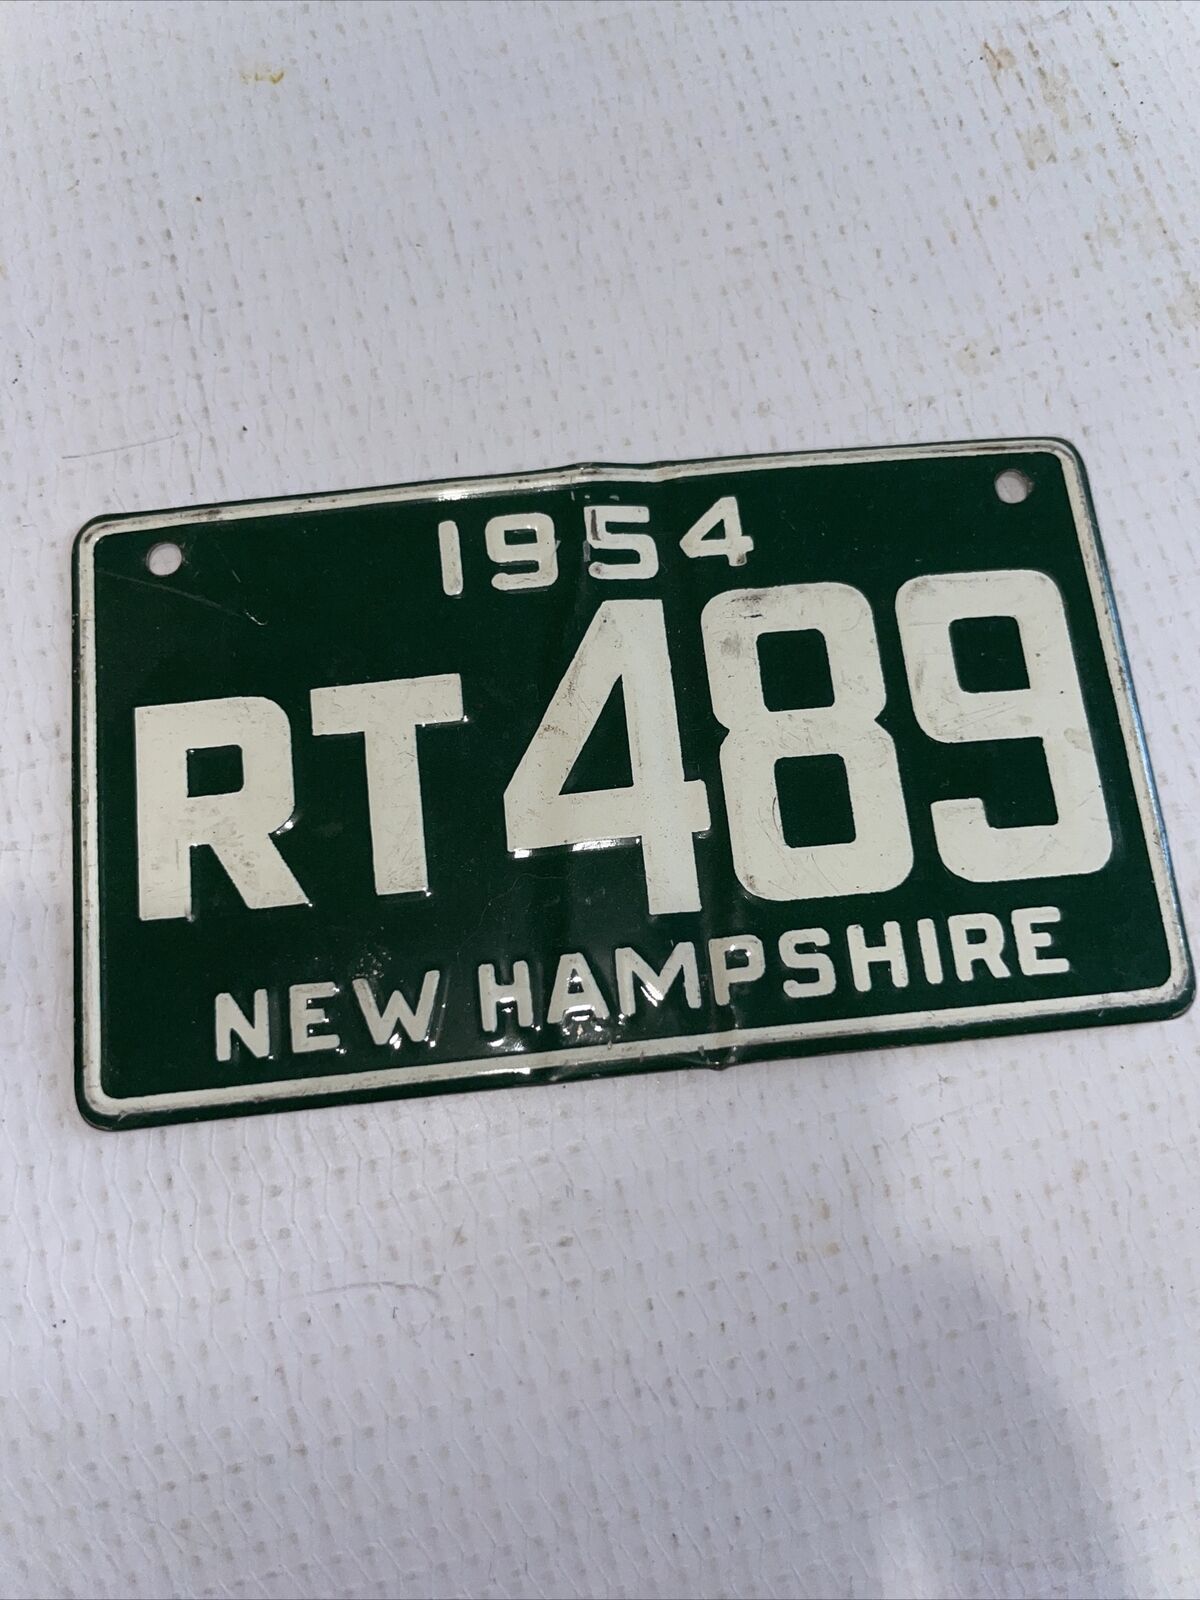 Vintage 1954 New Hampshire bicycle license plate green